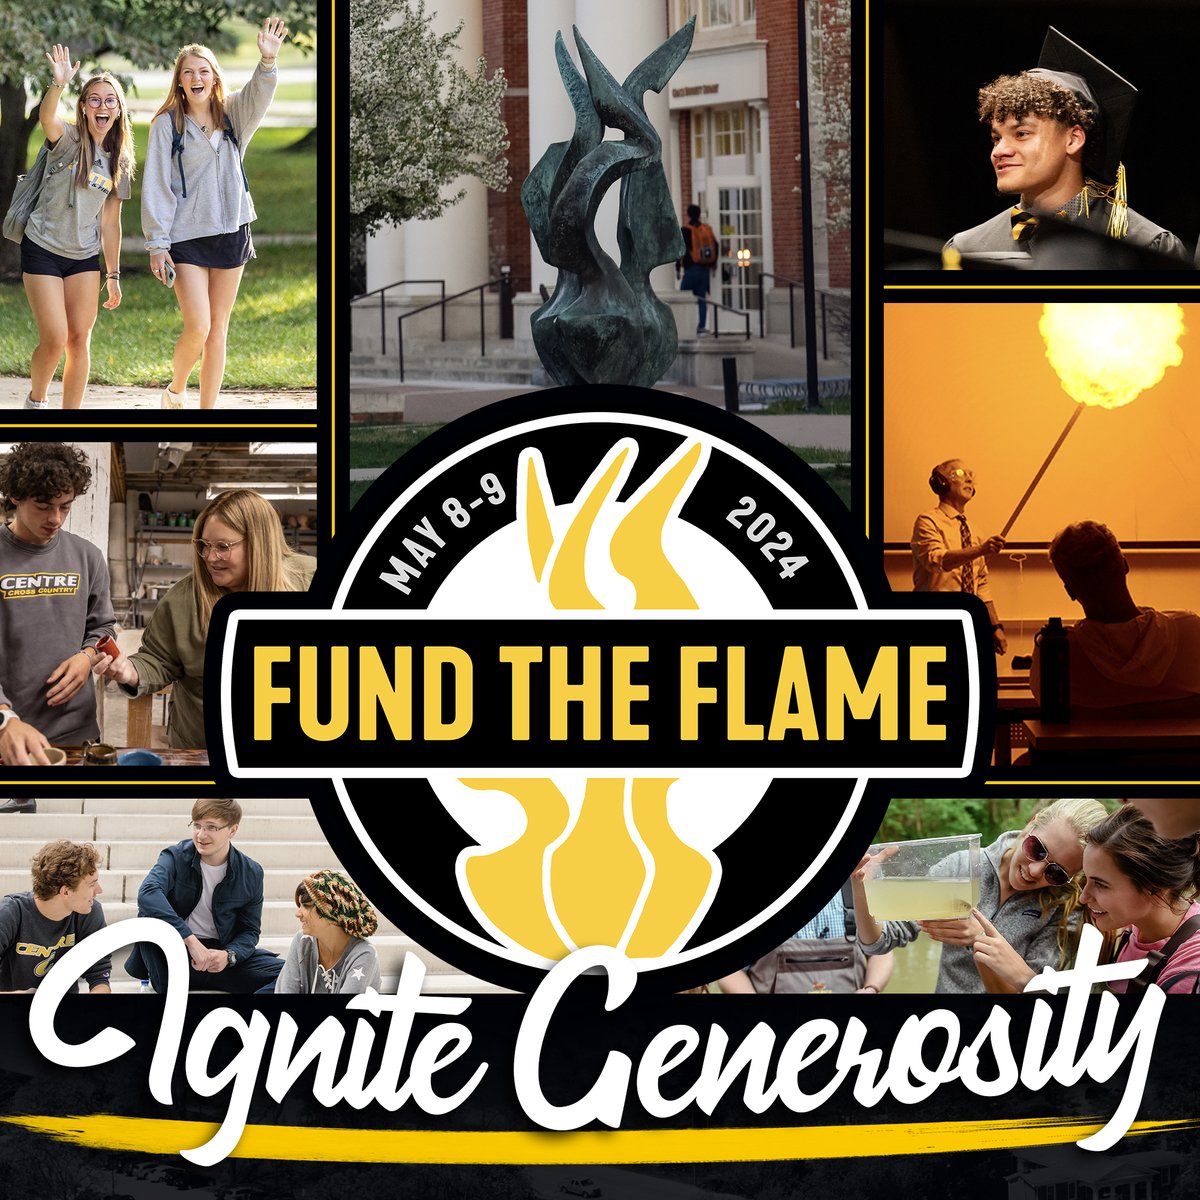 Save the date for @CentreC's day of giving - 𝗙𝘂𝗻𝗱 𝘁𝗵𝗲 𝗙𝗹𝗮𝗺𝗲! Launching one month from now, Fund the Flame will cover 36 hours 𝗠𝗮𝘆 𝟴-𝟵. Interested in making your gift now? Click the link below to support Centre! givecampus.com/gof65s